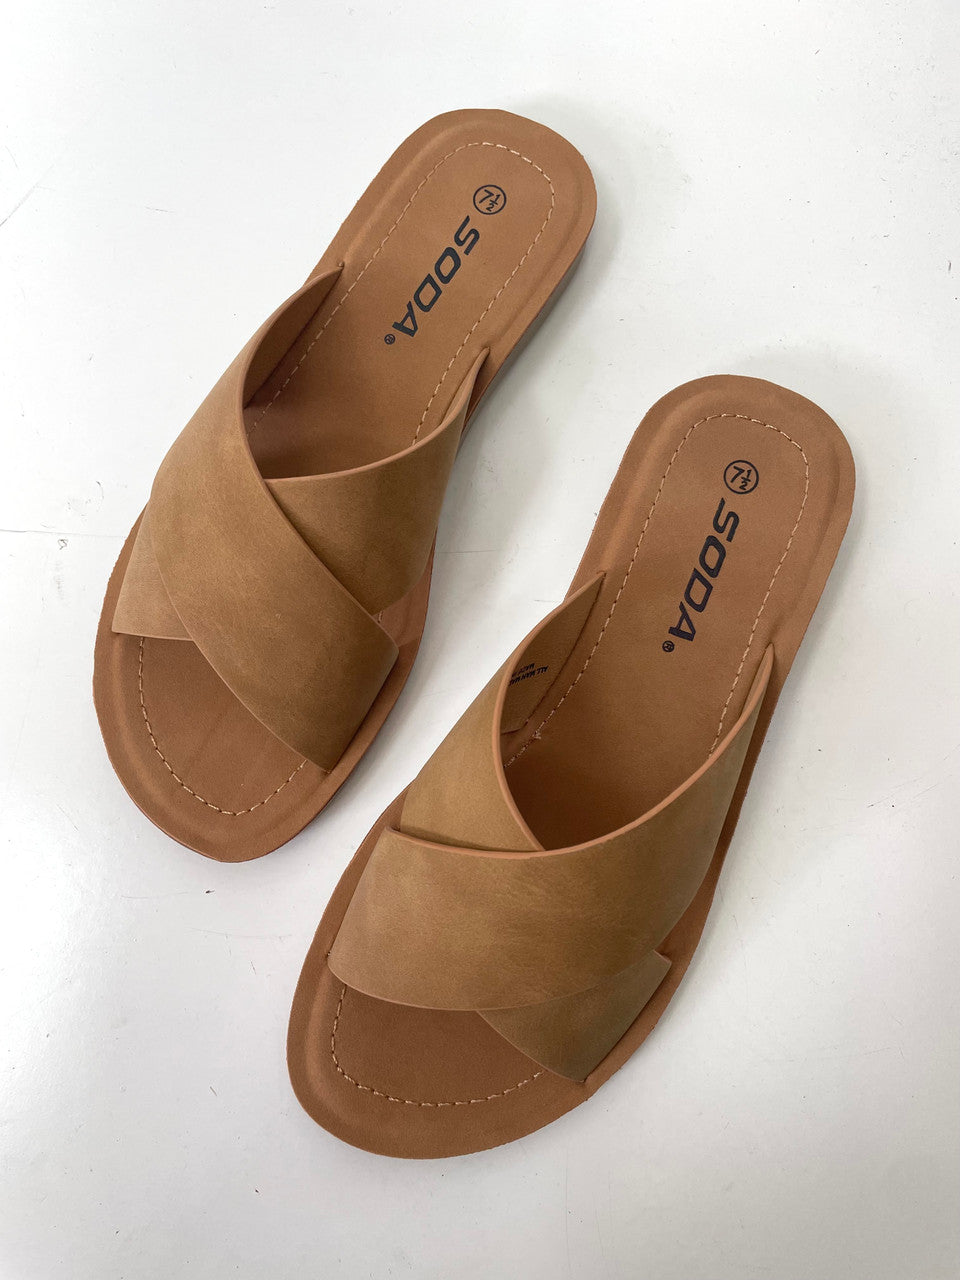 Reflect Coffee Sandals